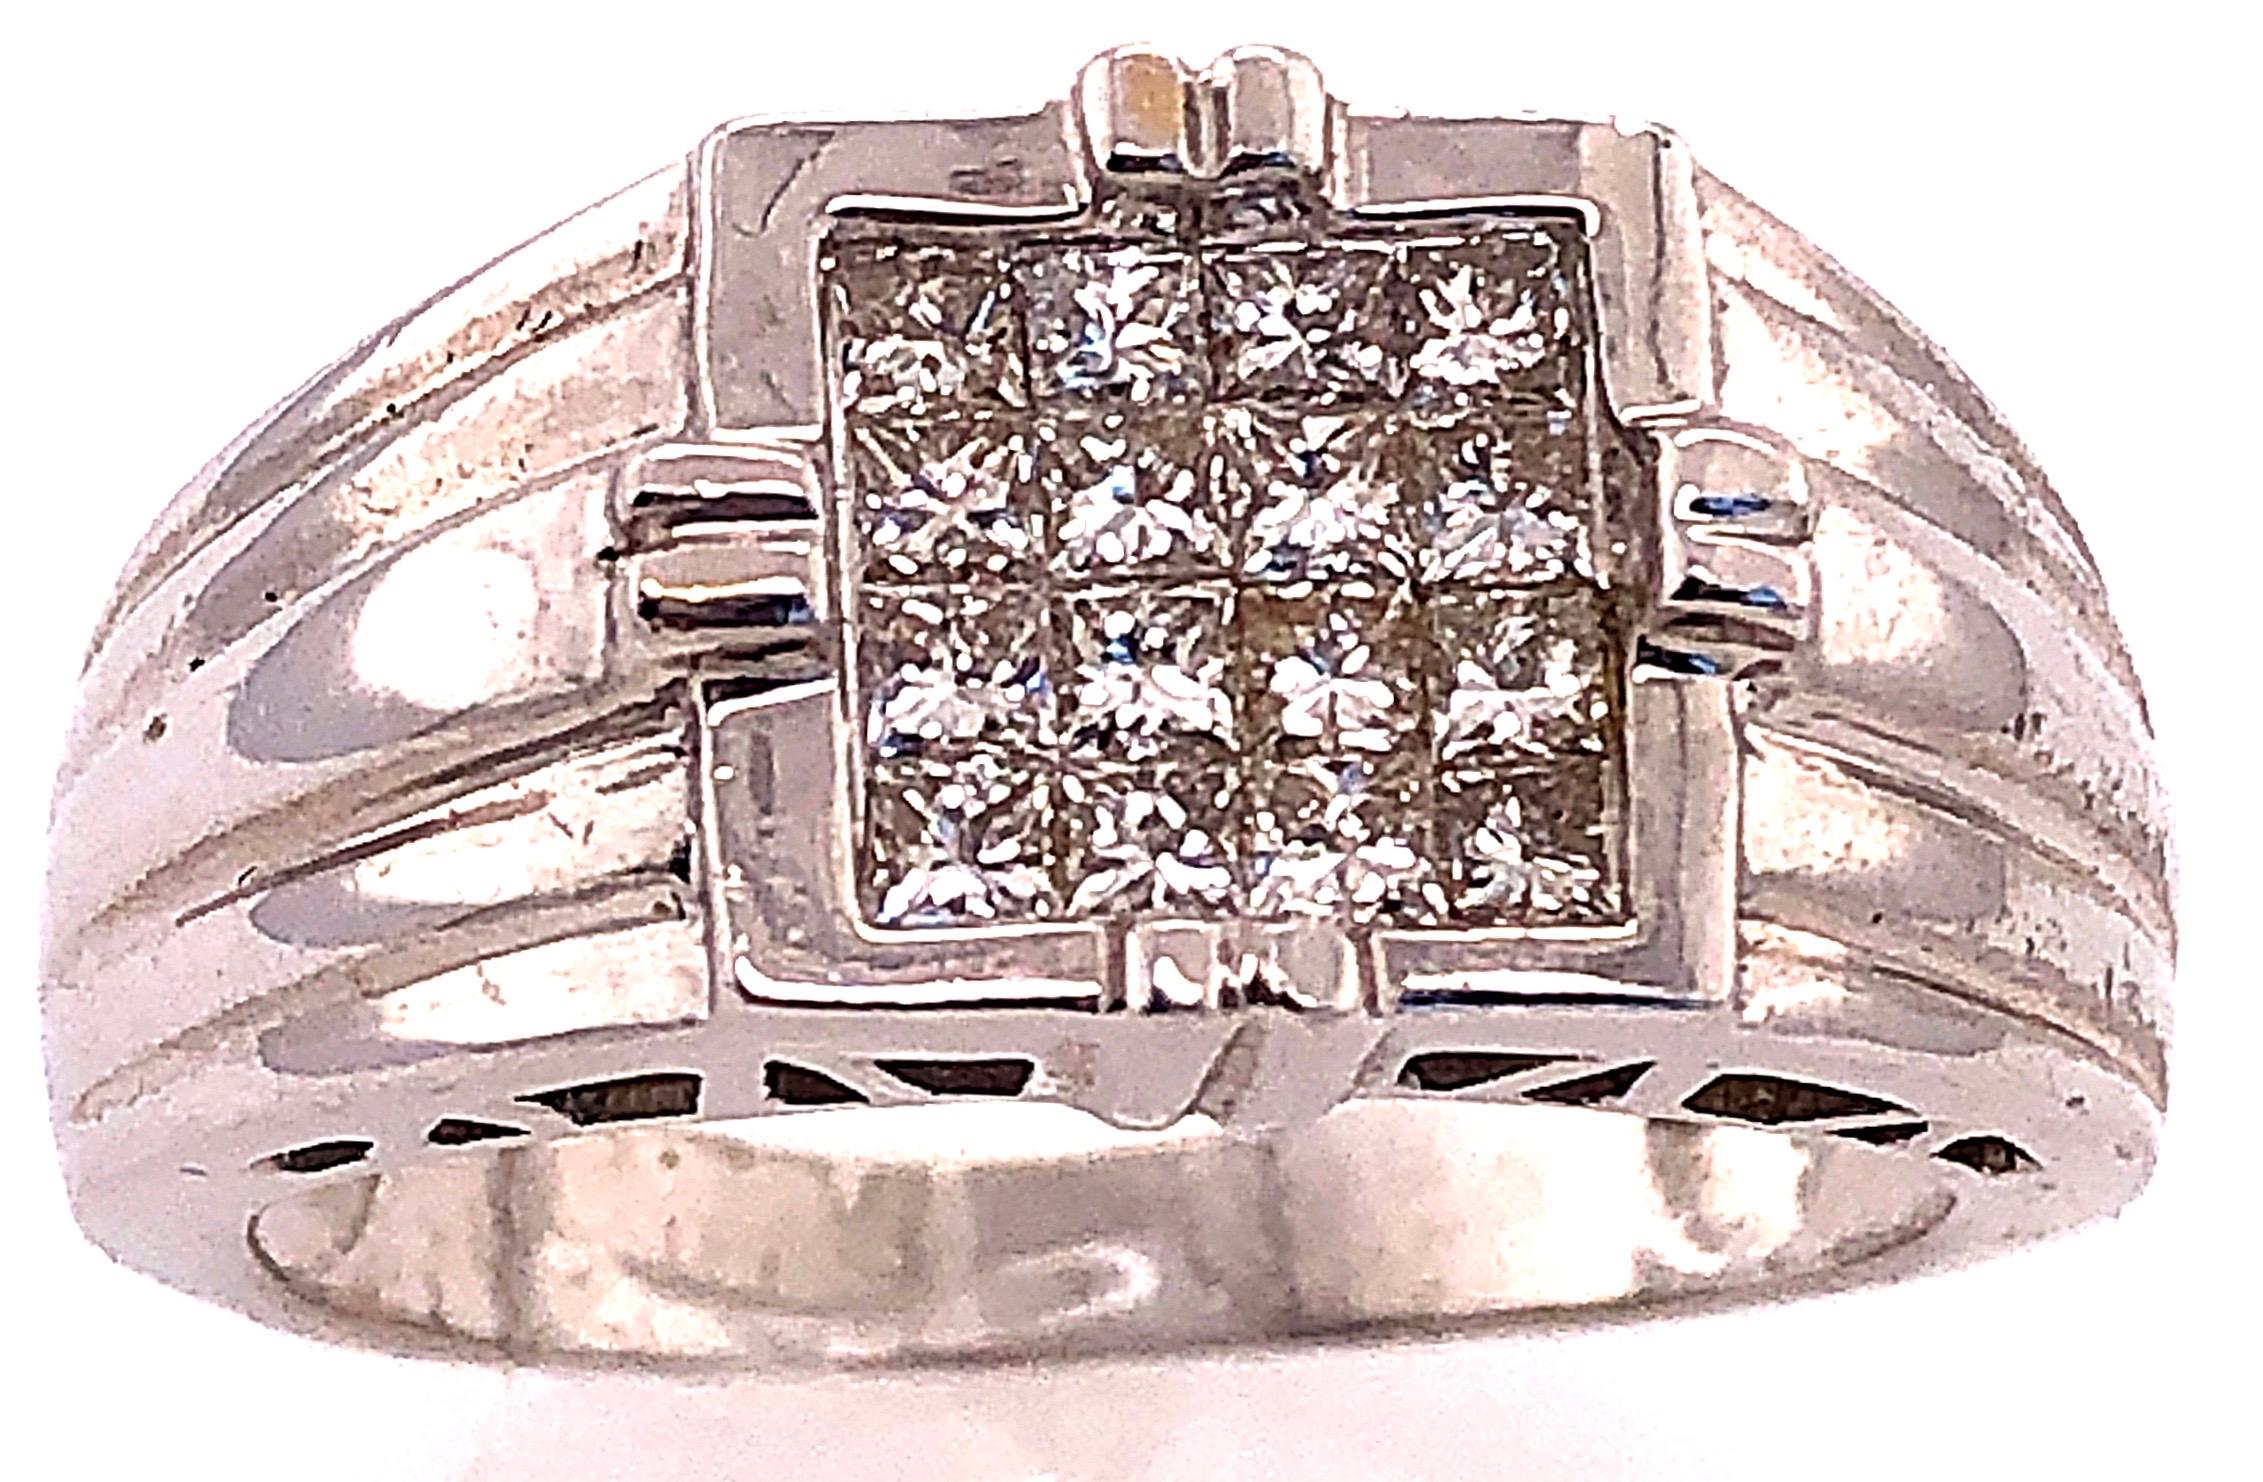 14 Karat White Gold Cluster Diamond Ring.
16 piece diamonds with 1.00 total diamond weight.
Size 11.25 
9.70 grams total weight.
11.90 mm ring height.